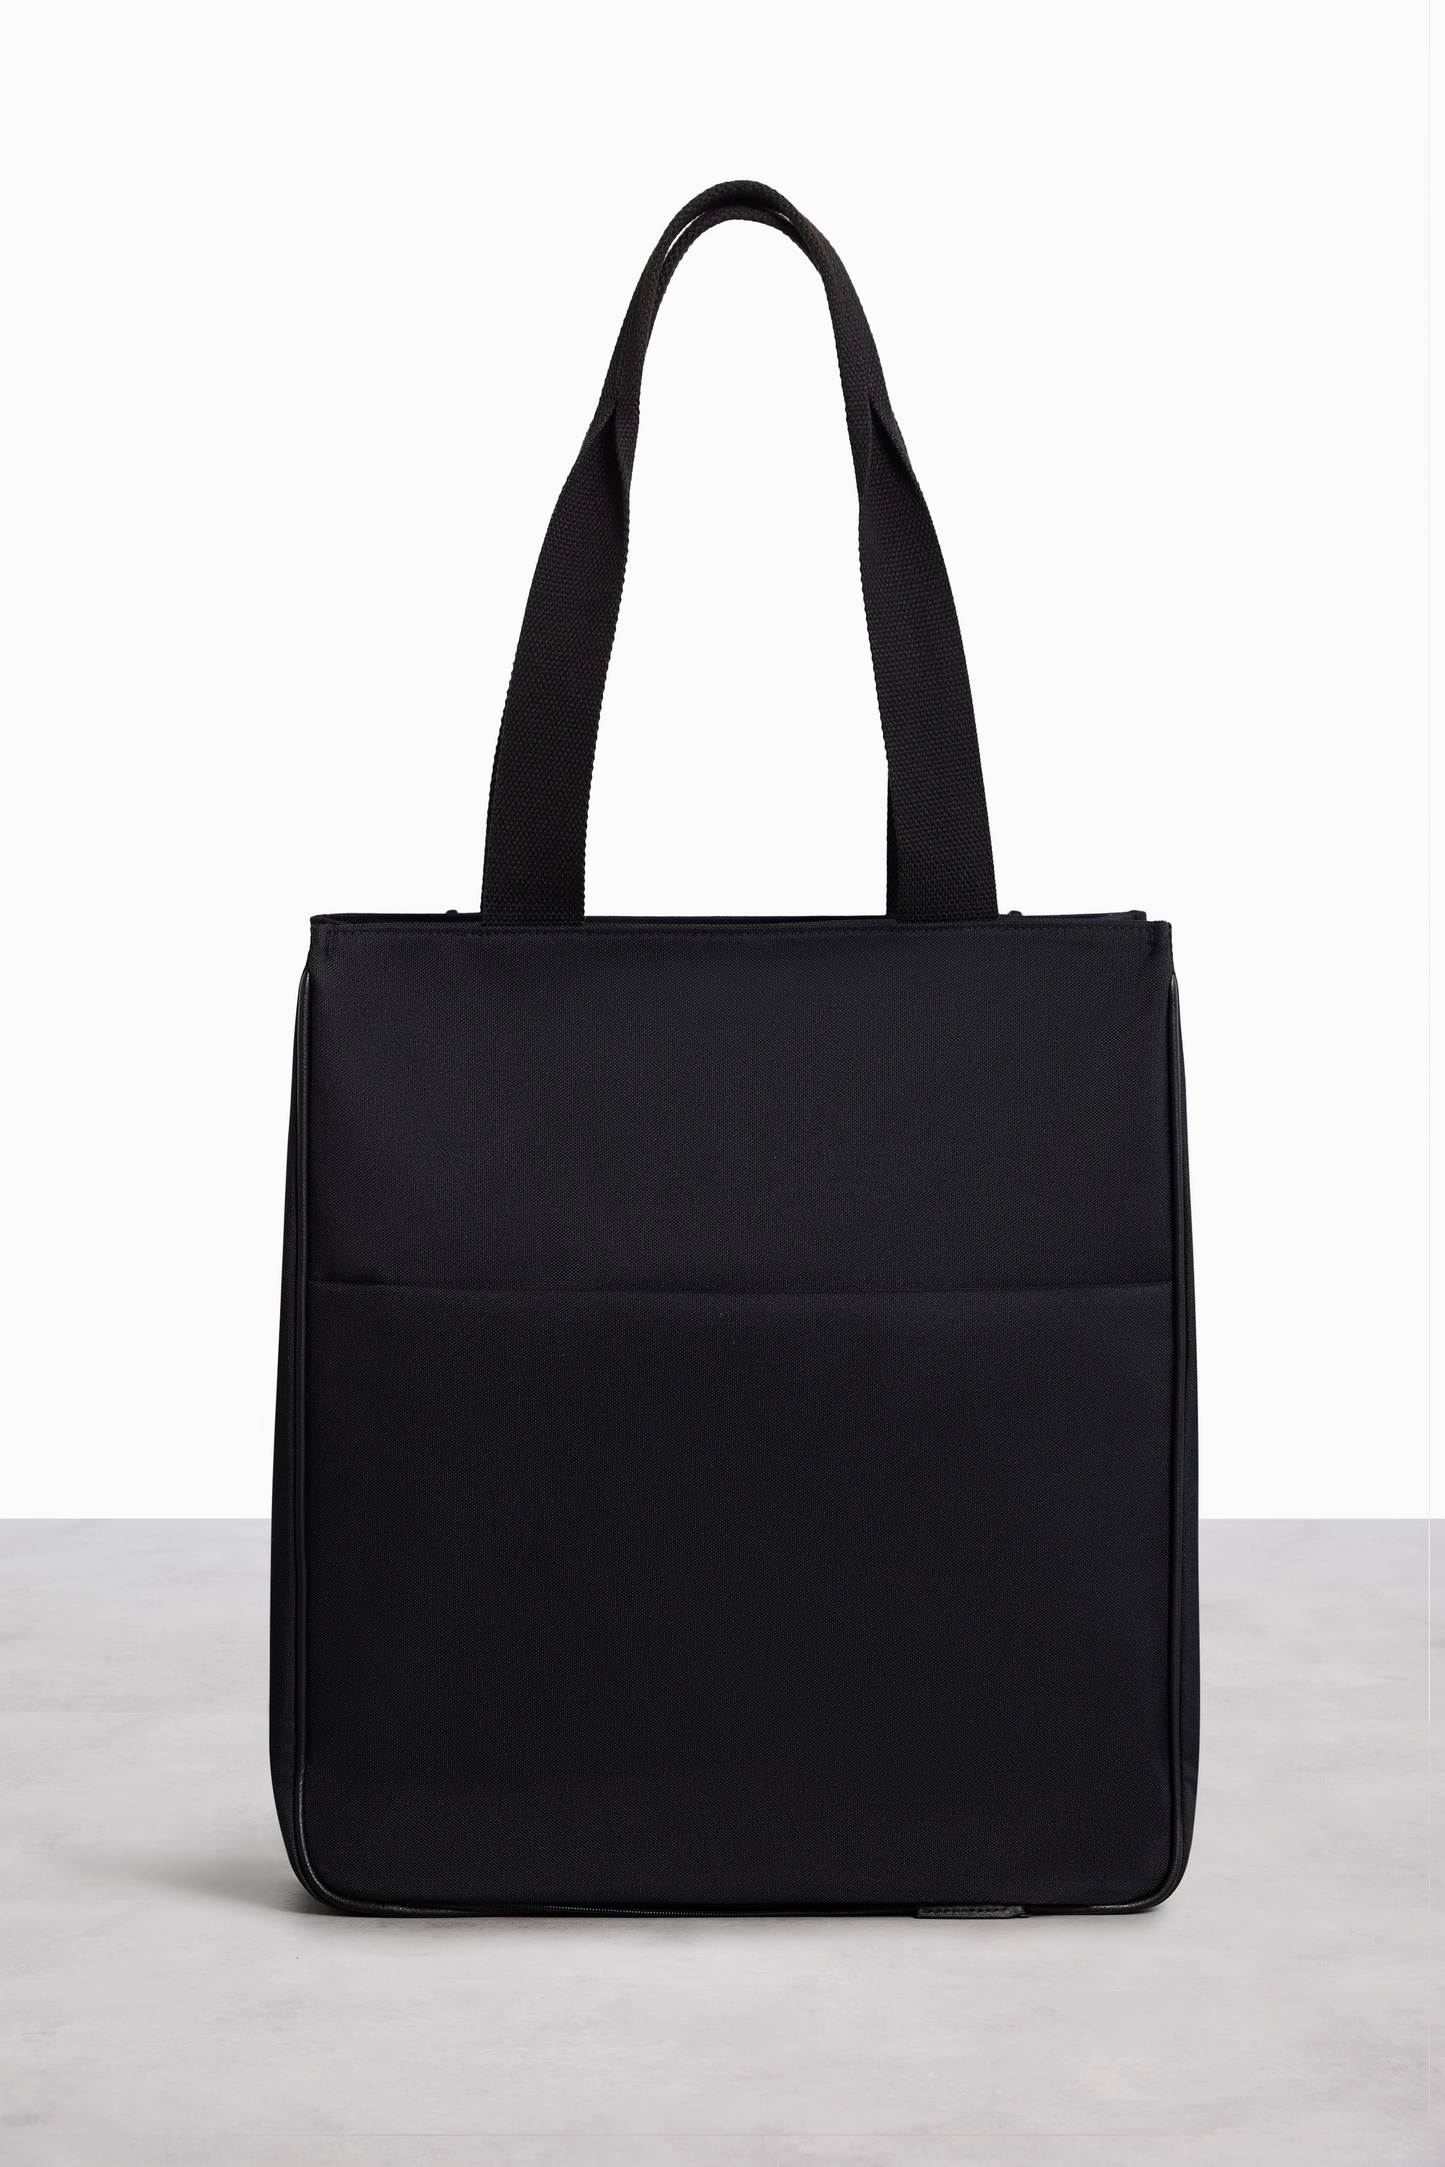 The North To South Tote in Black